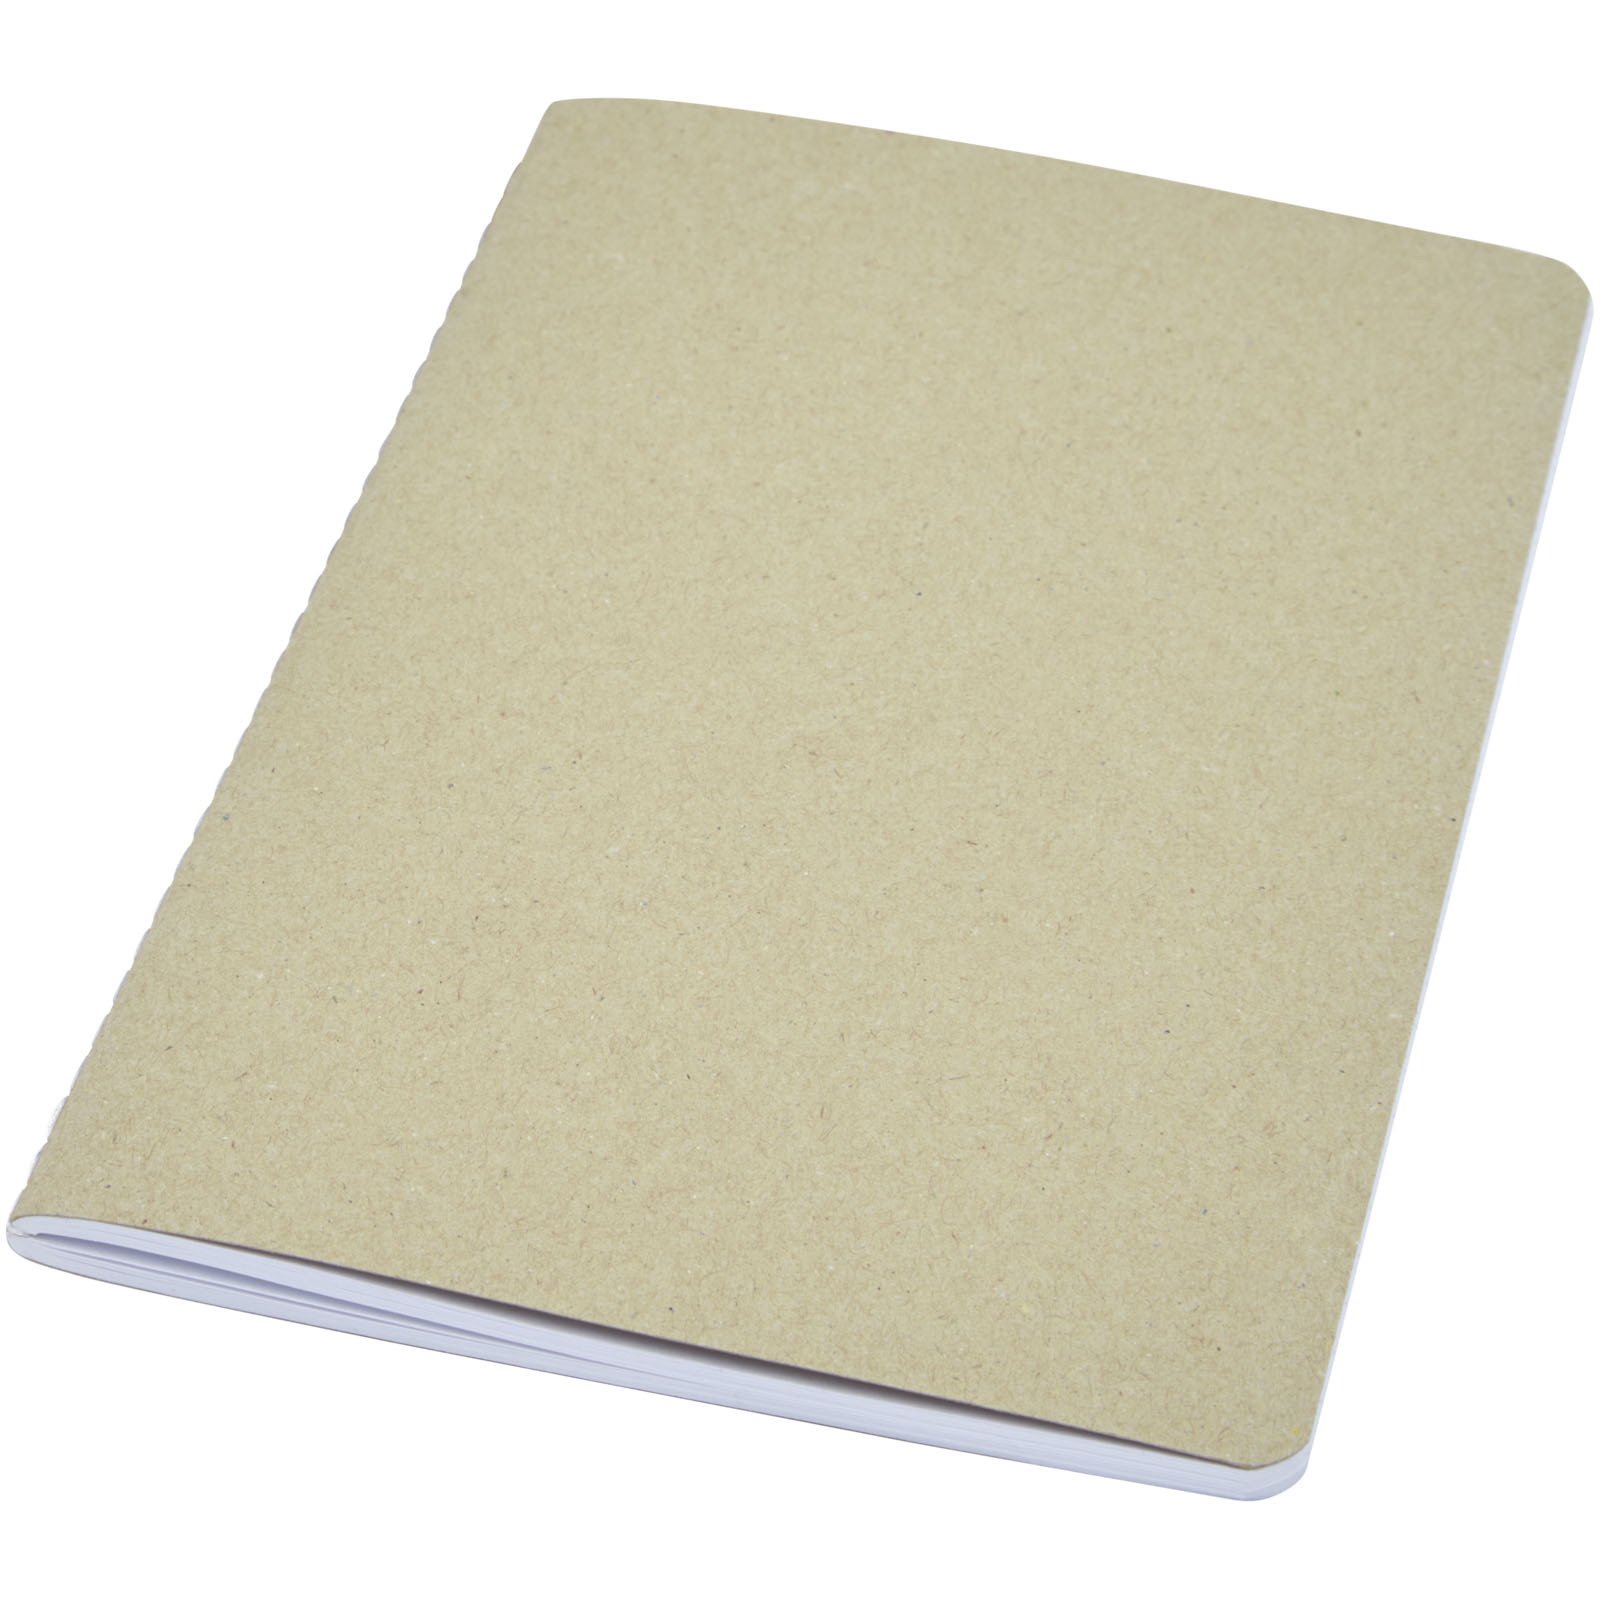 Notebooks - Gianna recycled cardboard notebook